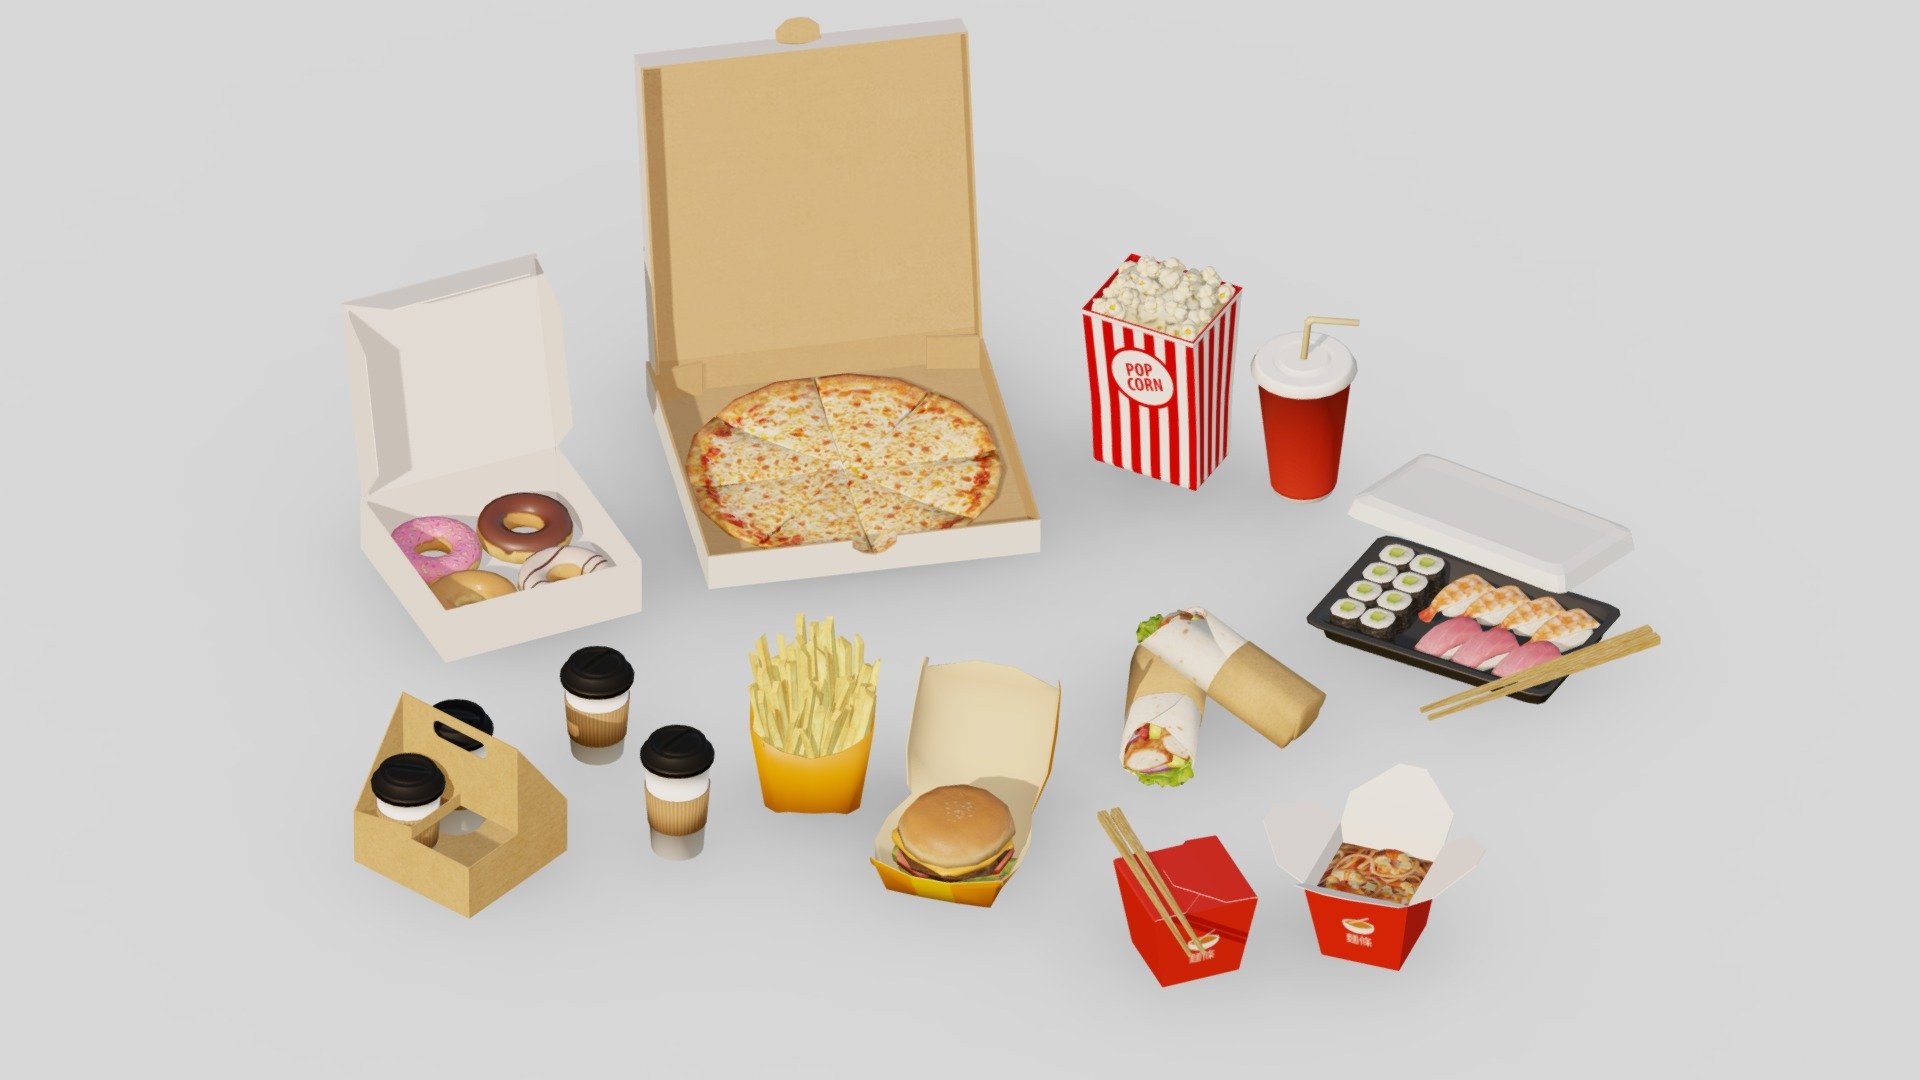 Low polygon model optimized for game.

Created with Blender

Texture Formats : 1024 x 1024

File Formats : FBX

Number of Meshes : 13

Number of Textures : 40 - BaseColor 11 - Height 8 - Normal 10 - Roughness 11

Number of Materials : 10 - Takeaway Fast Food G43 Low-poly - 3D model by OHOW 3d model